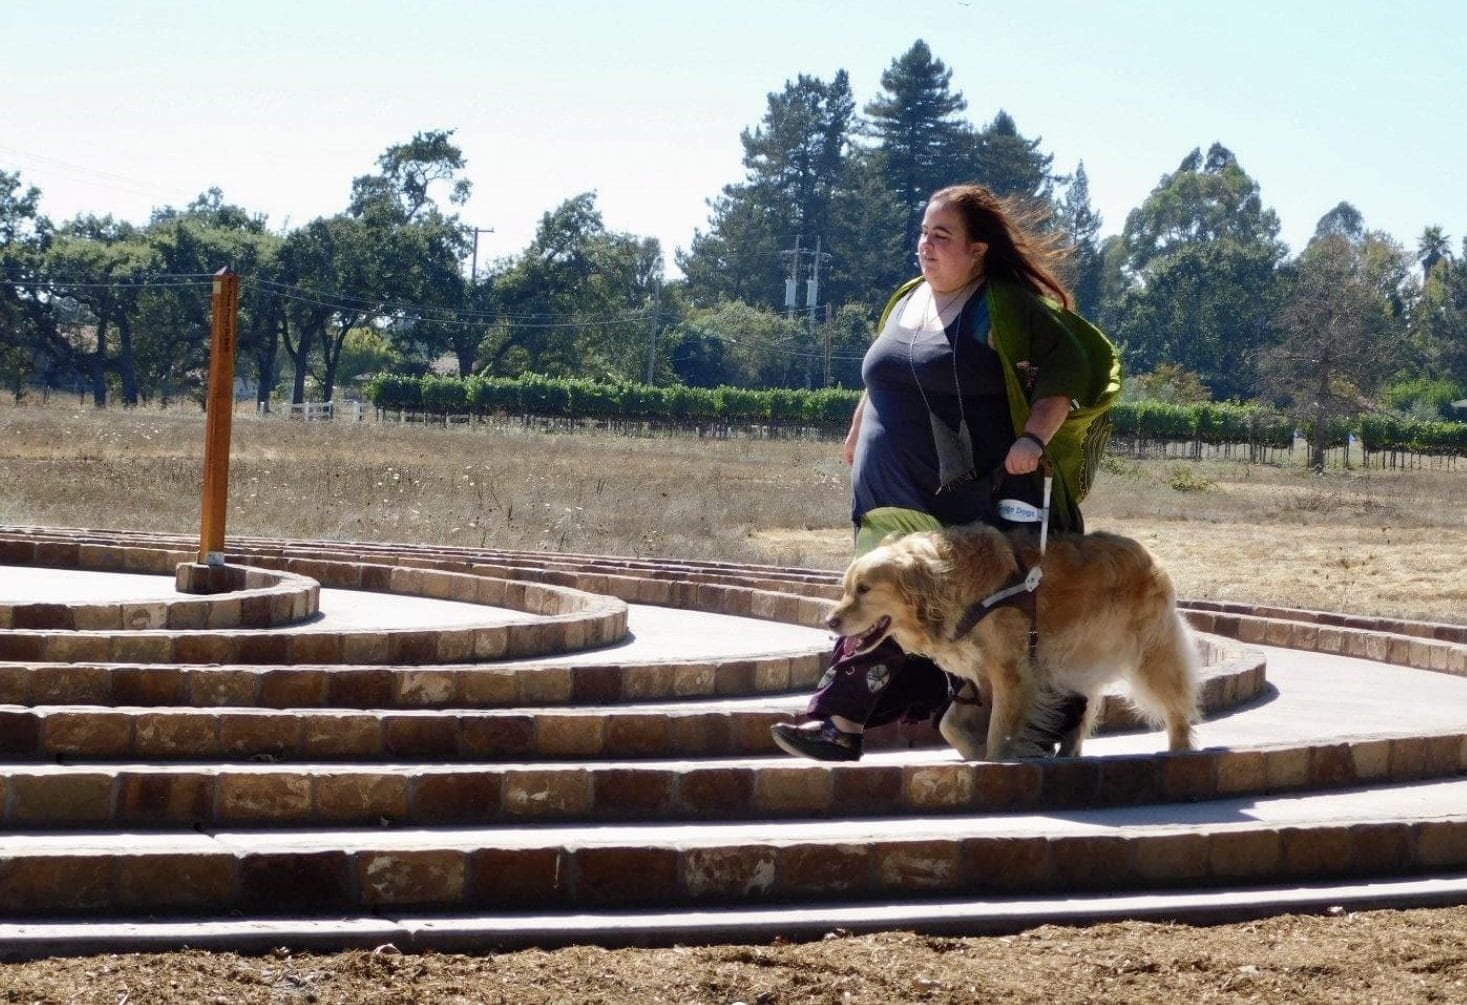 Maia walking through a stone labyrinth outside with her guide dog